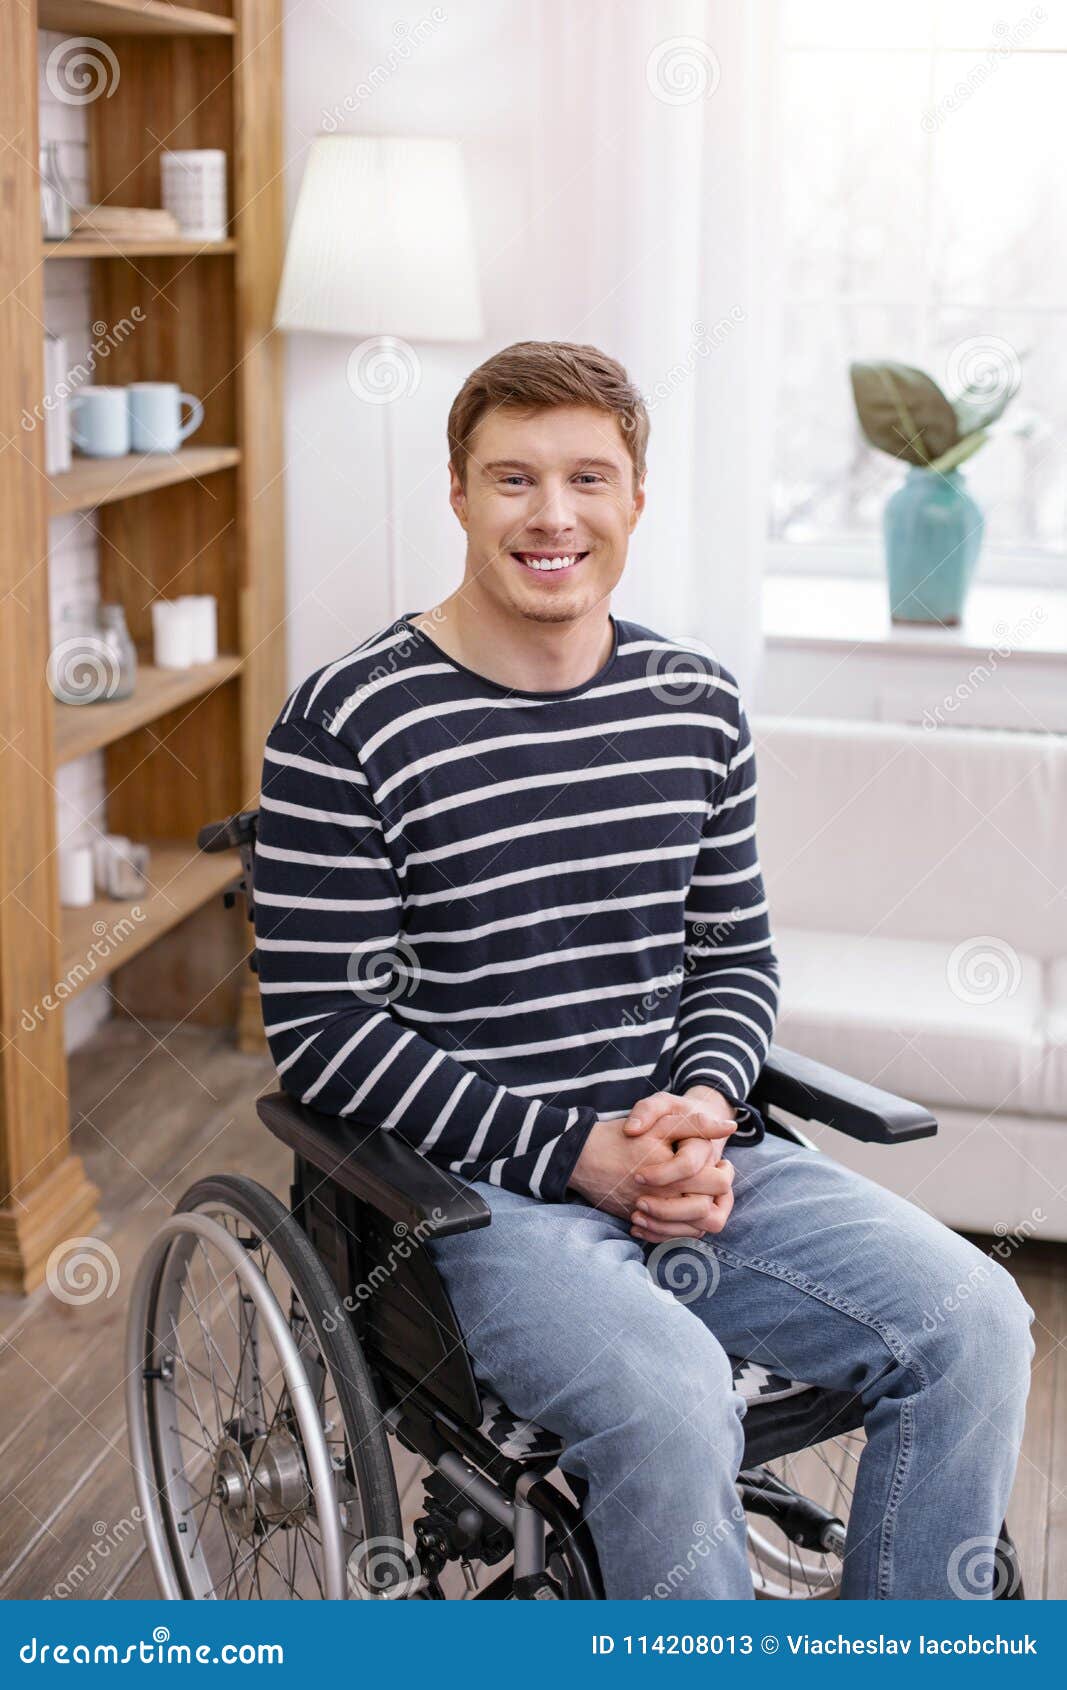 Handsome Young Man Being Paralyzed Stock Image - Image of facial ...